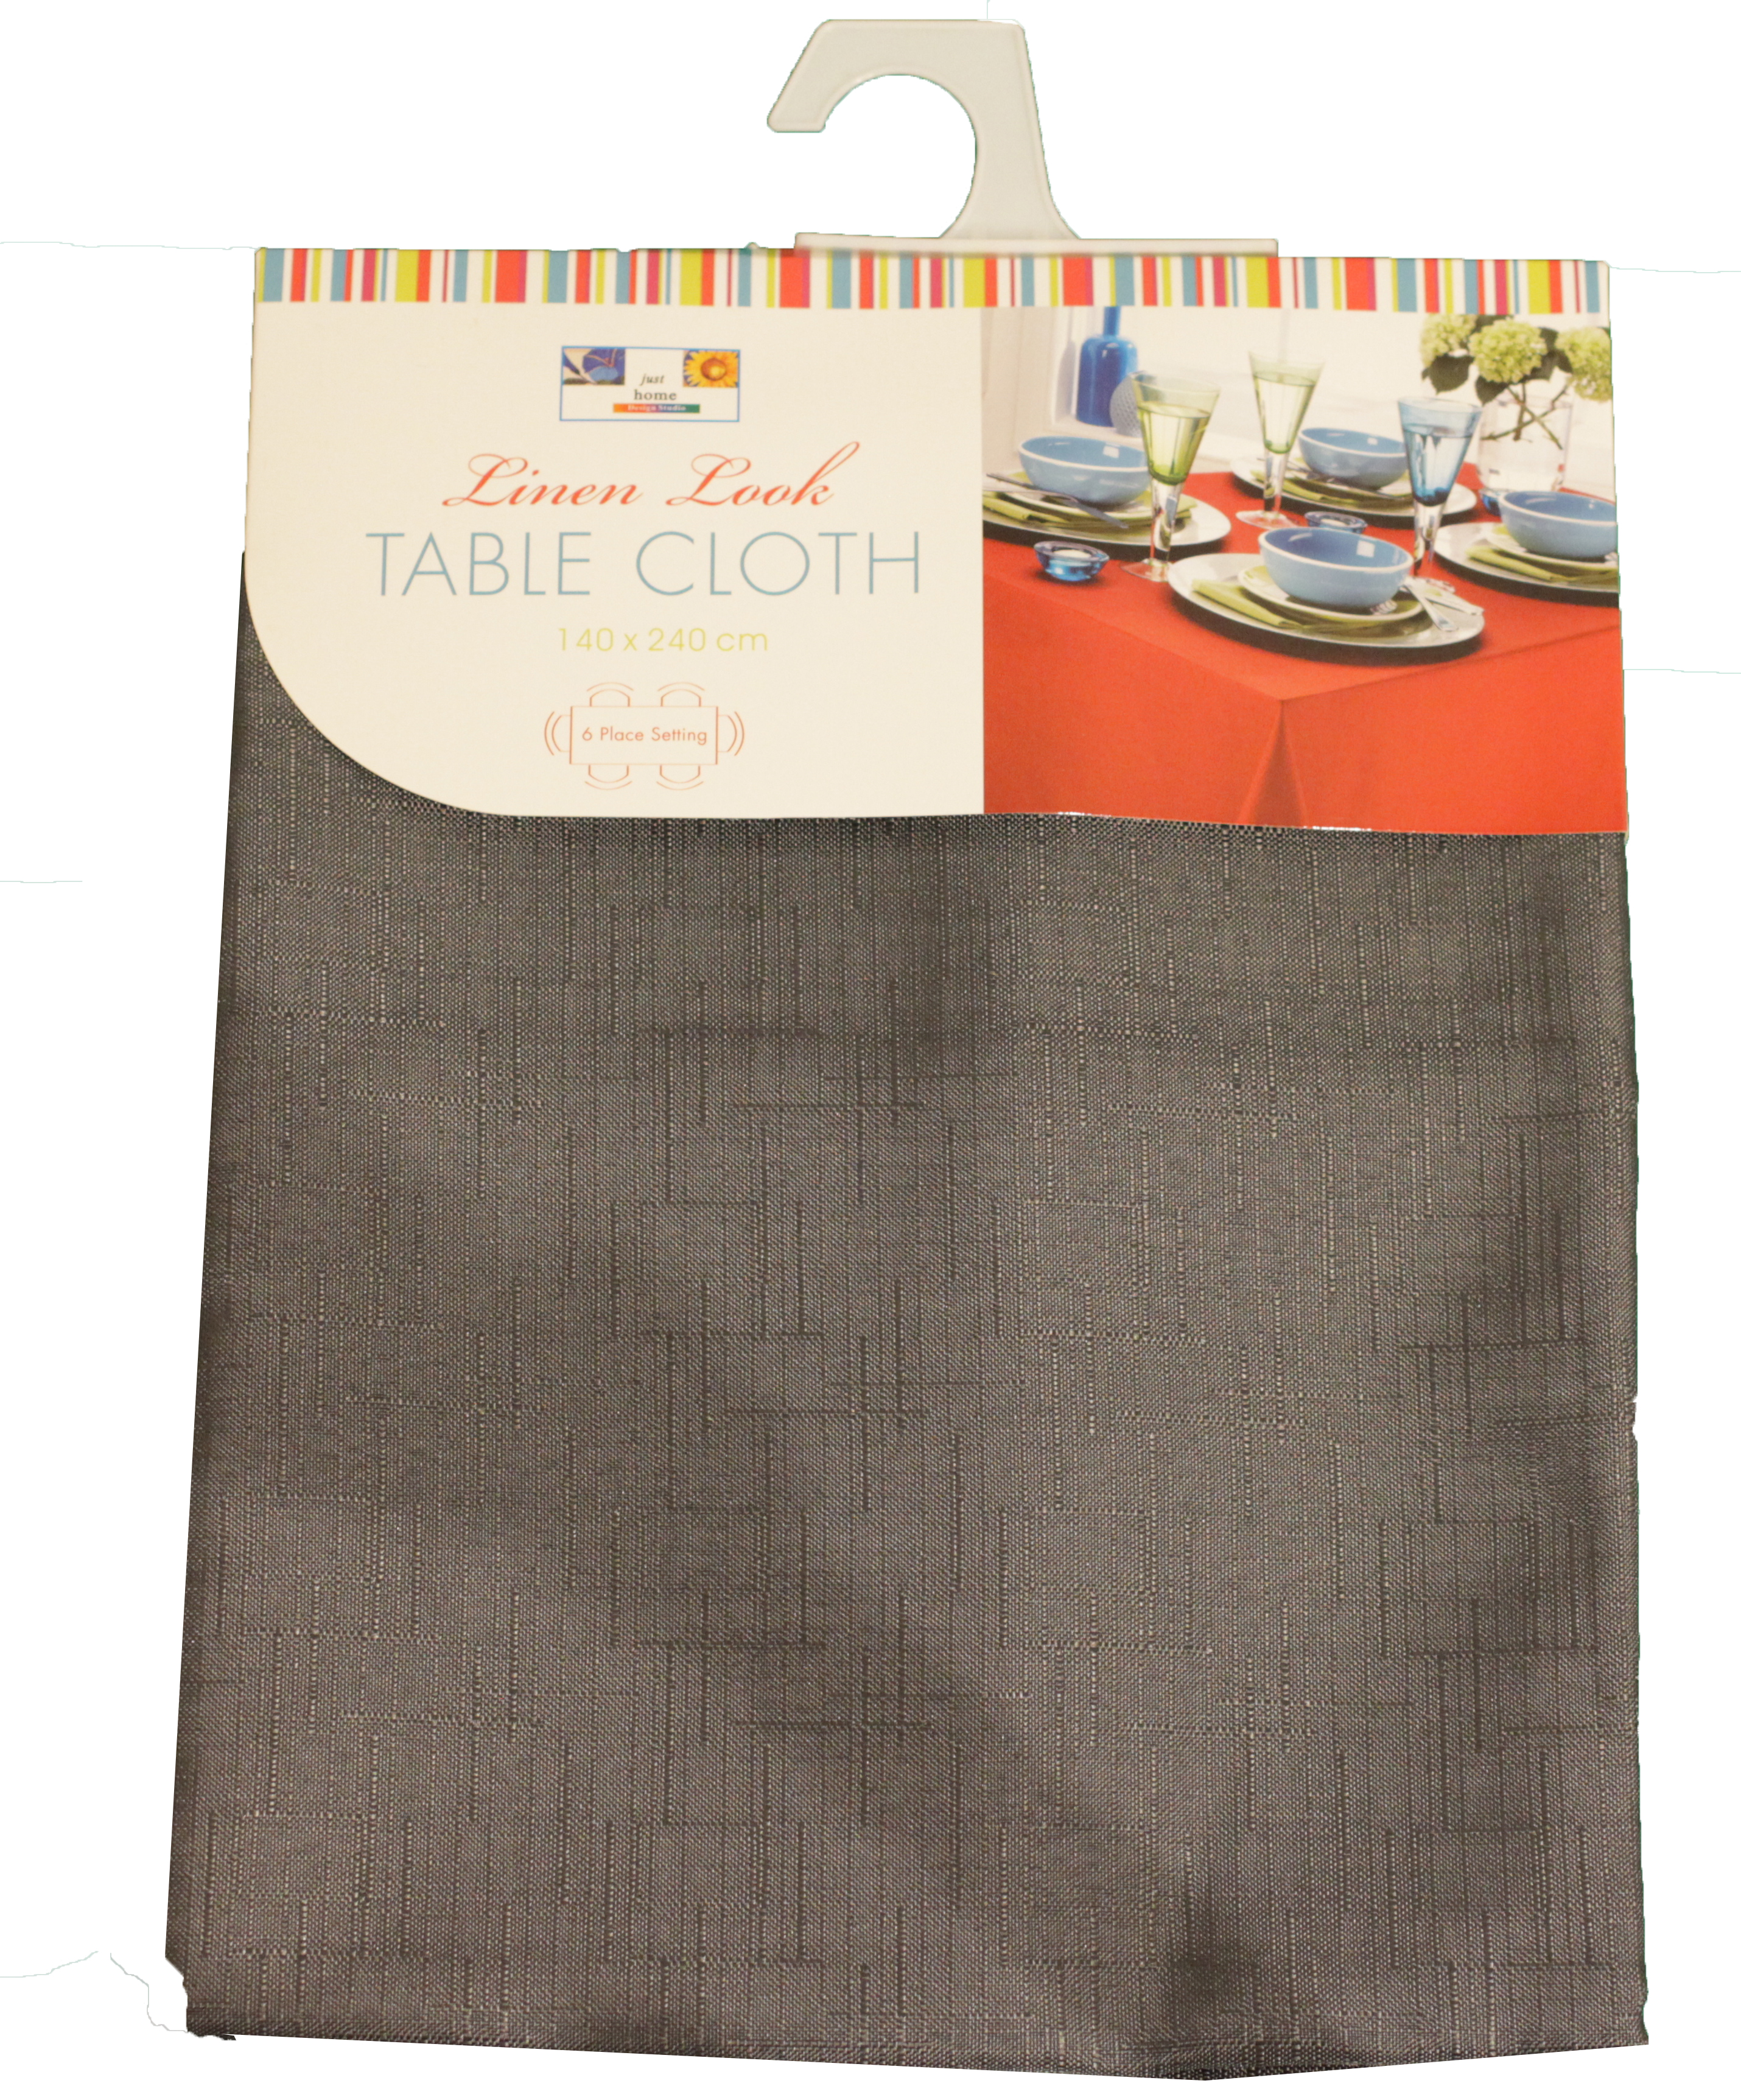 LINEN LOOK TABLECLOTH ROUND 180CM 4 ASSORTED COLORS